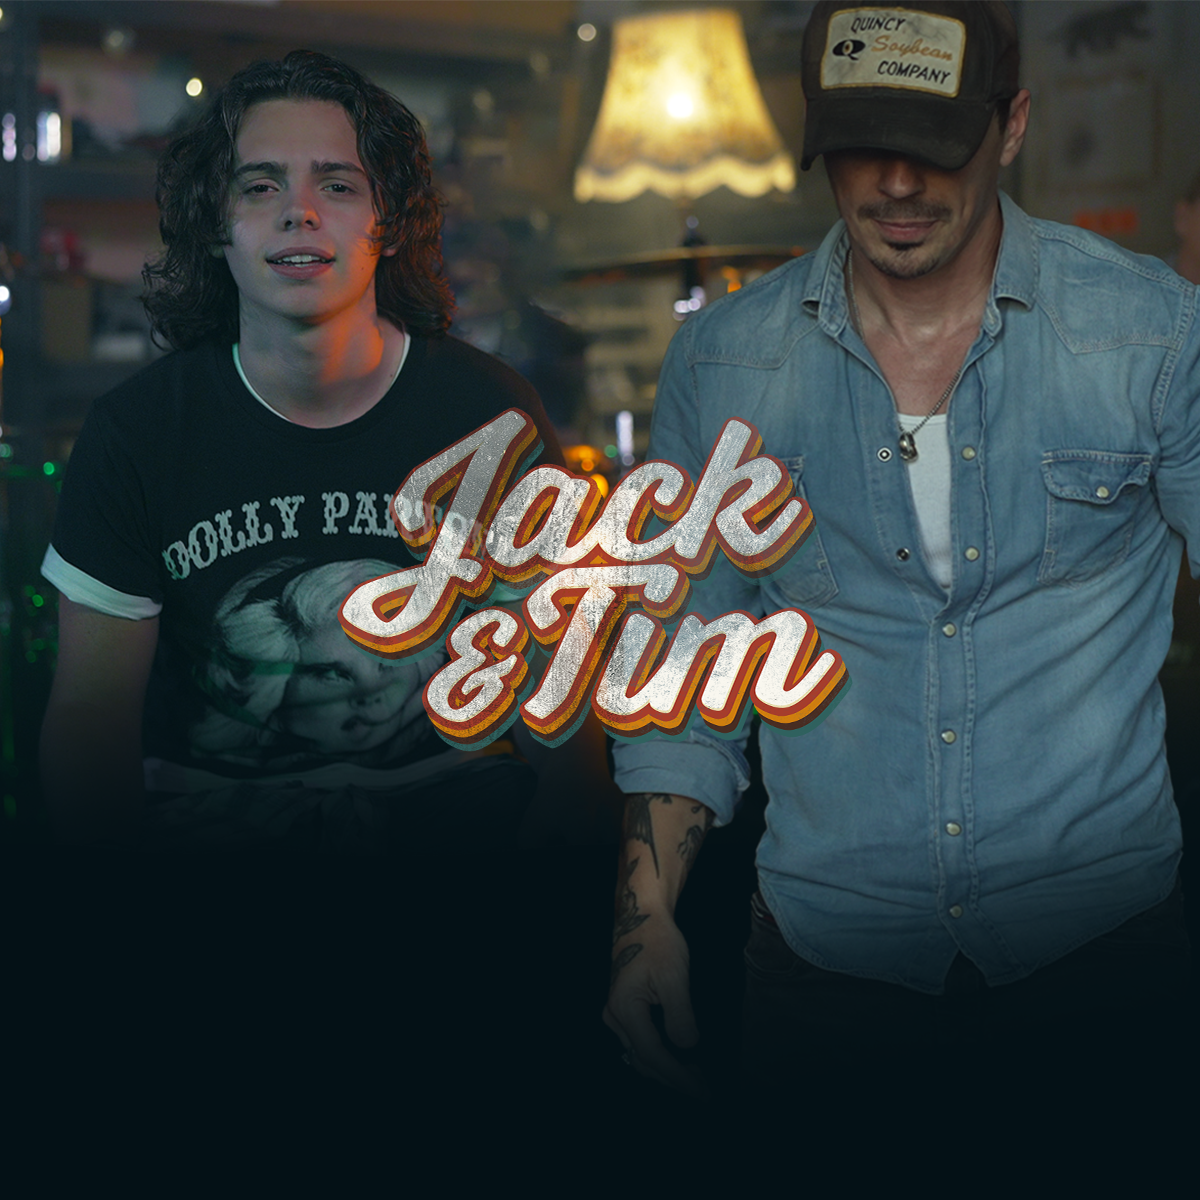 Father and son duo Jack and Tim face the camera in a dimly lit room. They wear casual clothing and Tim has a baseball cap on obscuring his face.